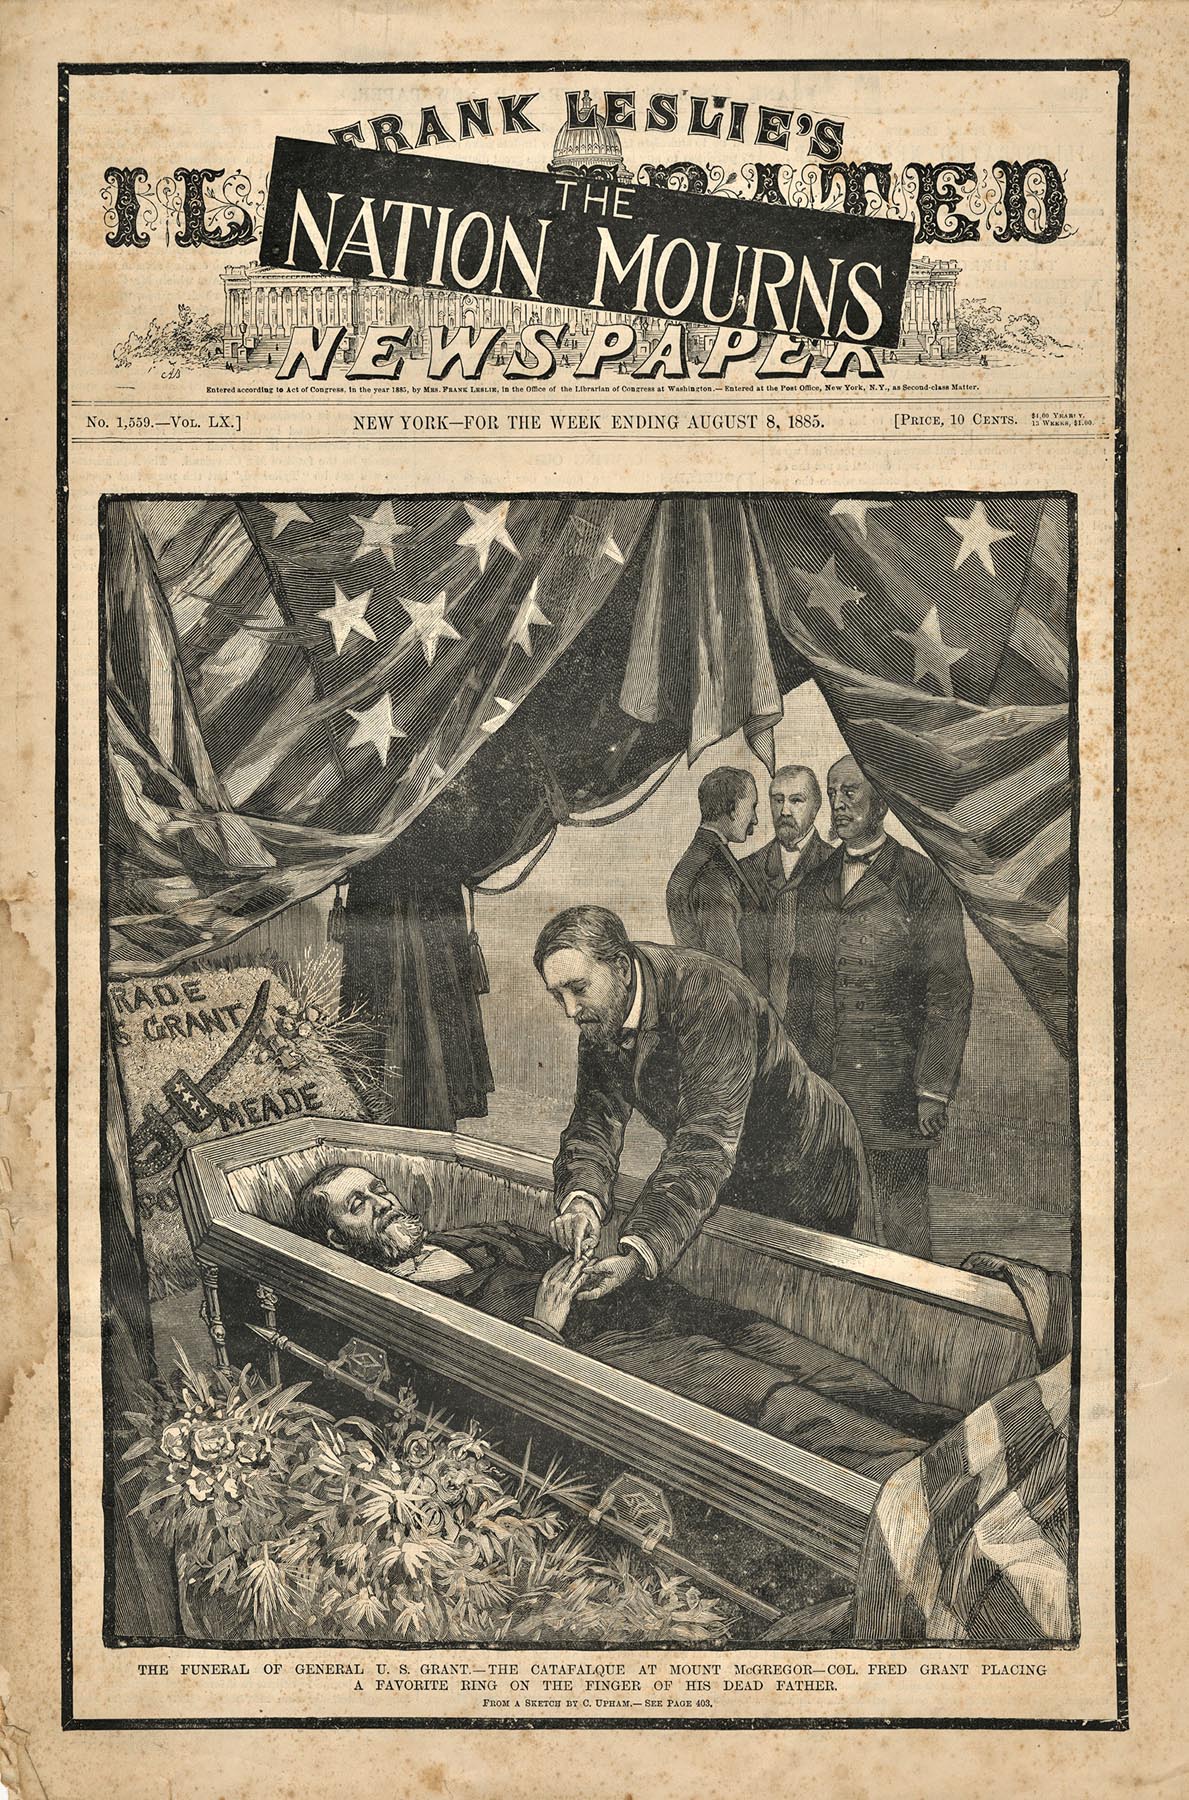 The Funeral of U. S. Grant - The Catafalque at Mount McGregor - Col. Fred Grant Placing a Favorite Ring on the Finger of his Dead Father, From a Sketch by C. Upham 